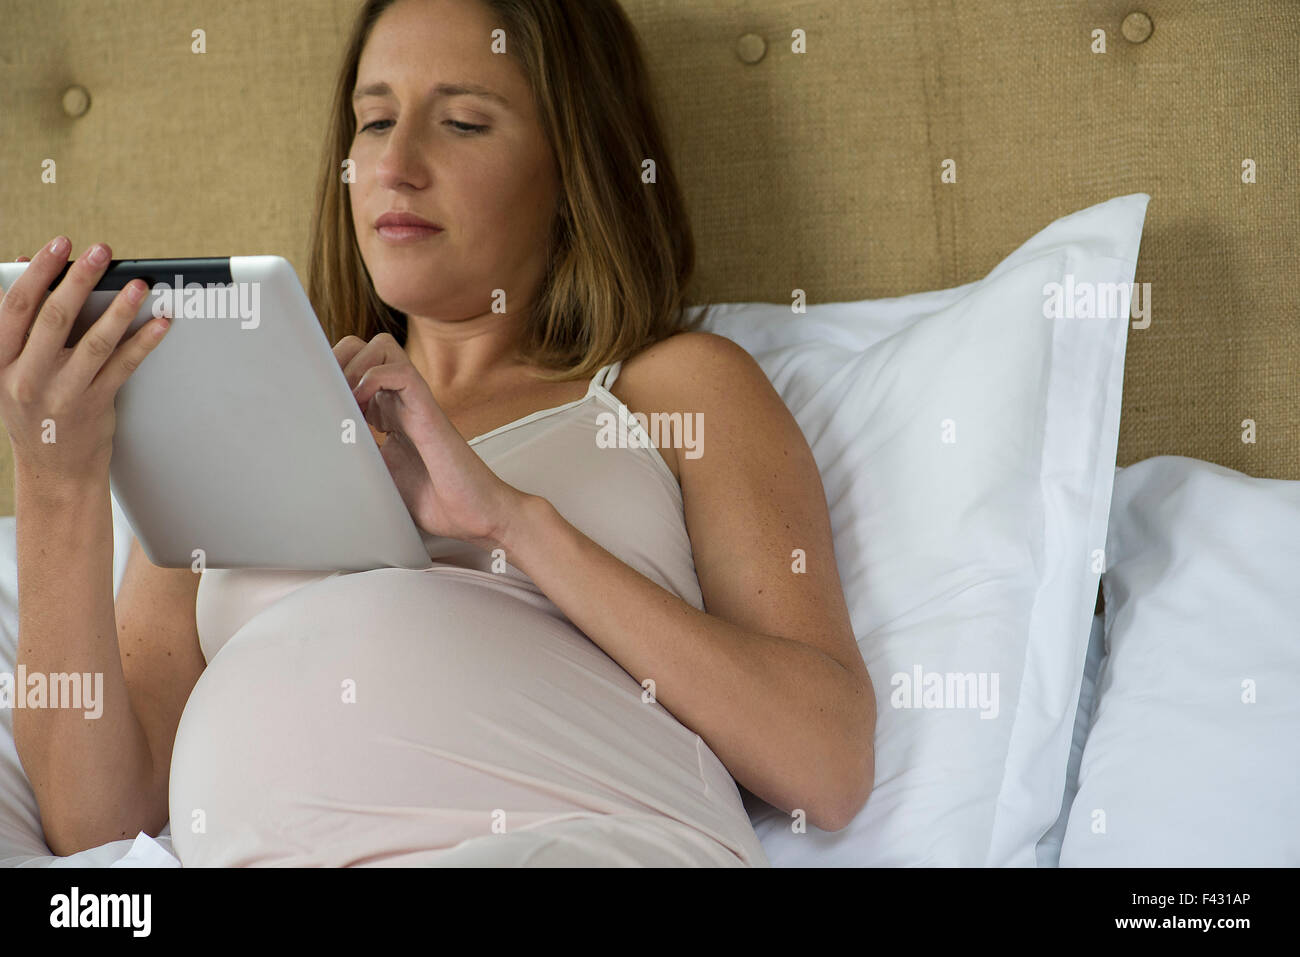 Pregnant woman Lying in Bed using digital tablet Banque D'Images